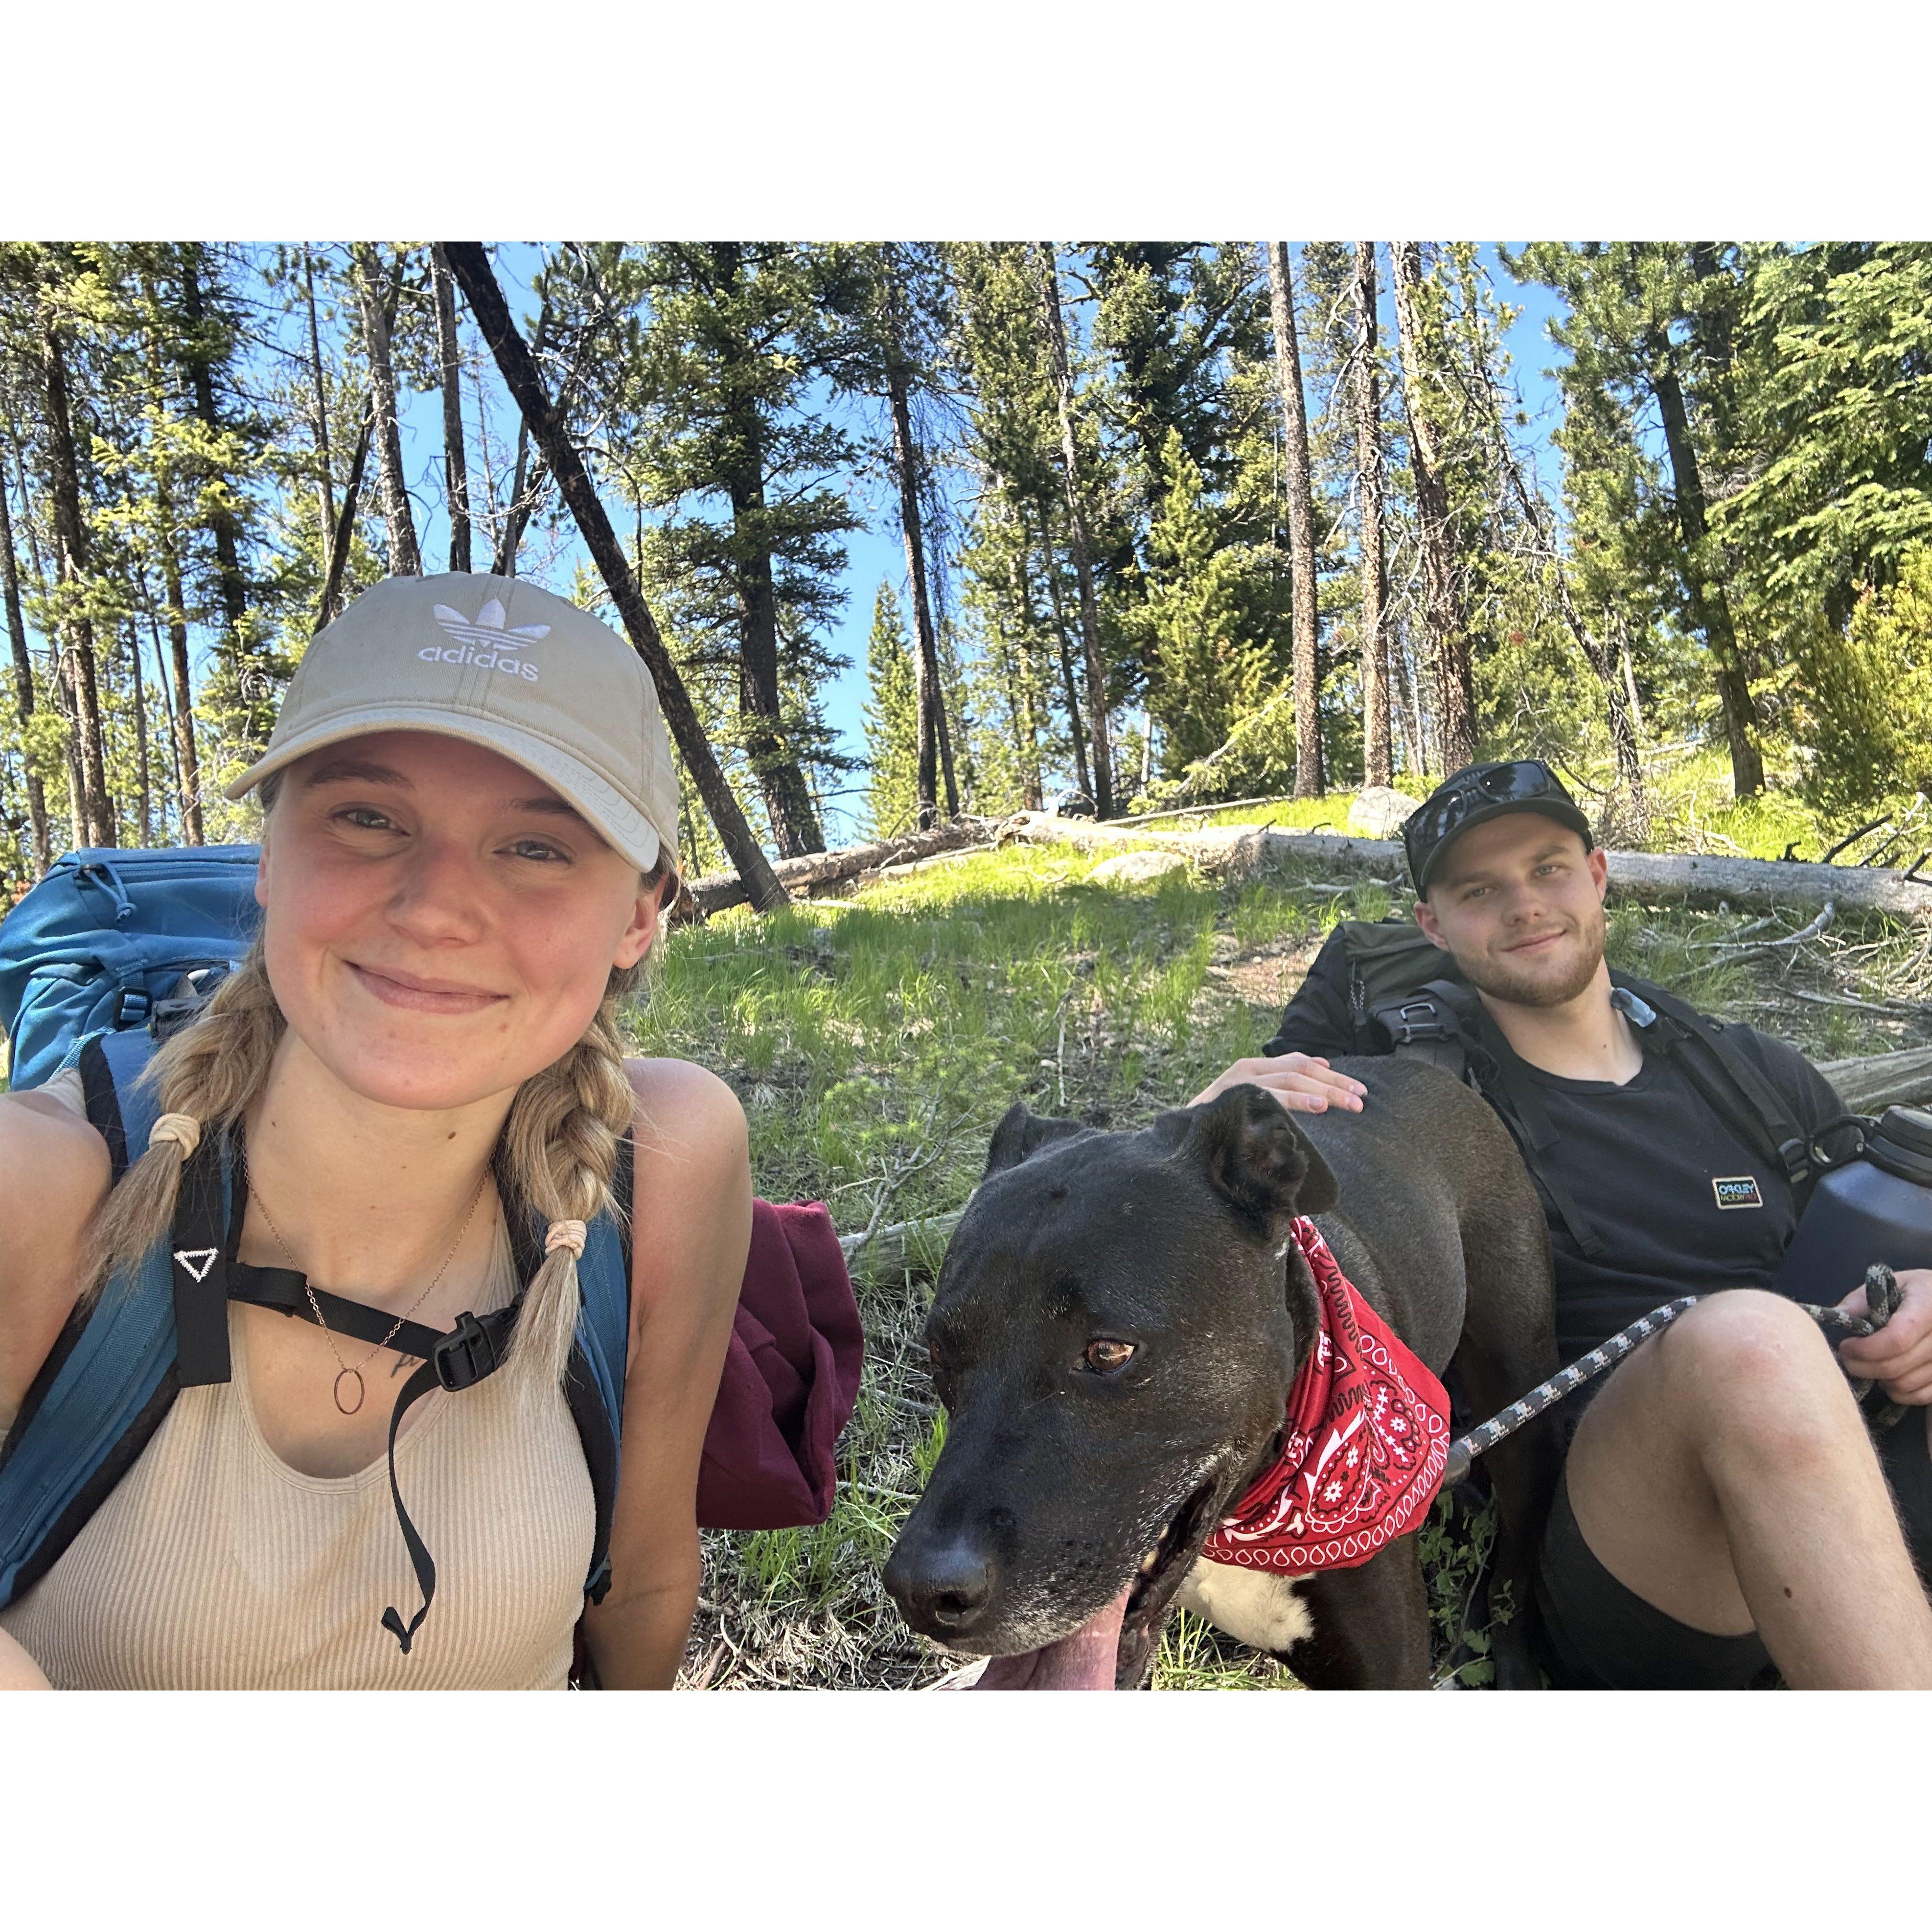 Our first backpacking trip at Redfish Lake!